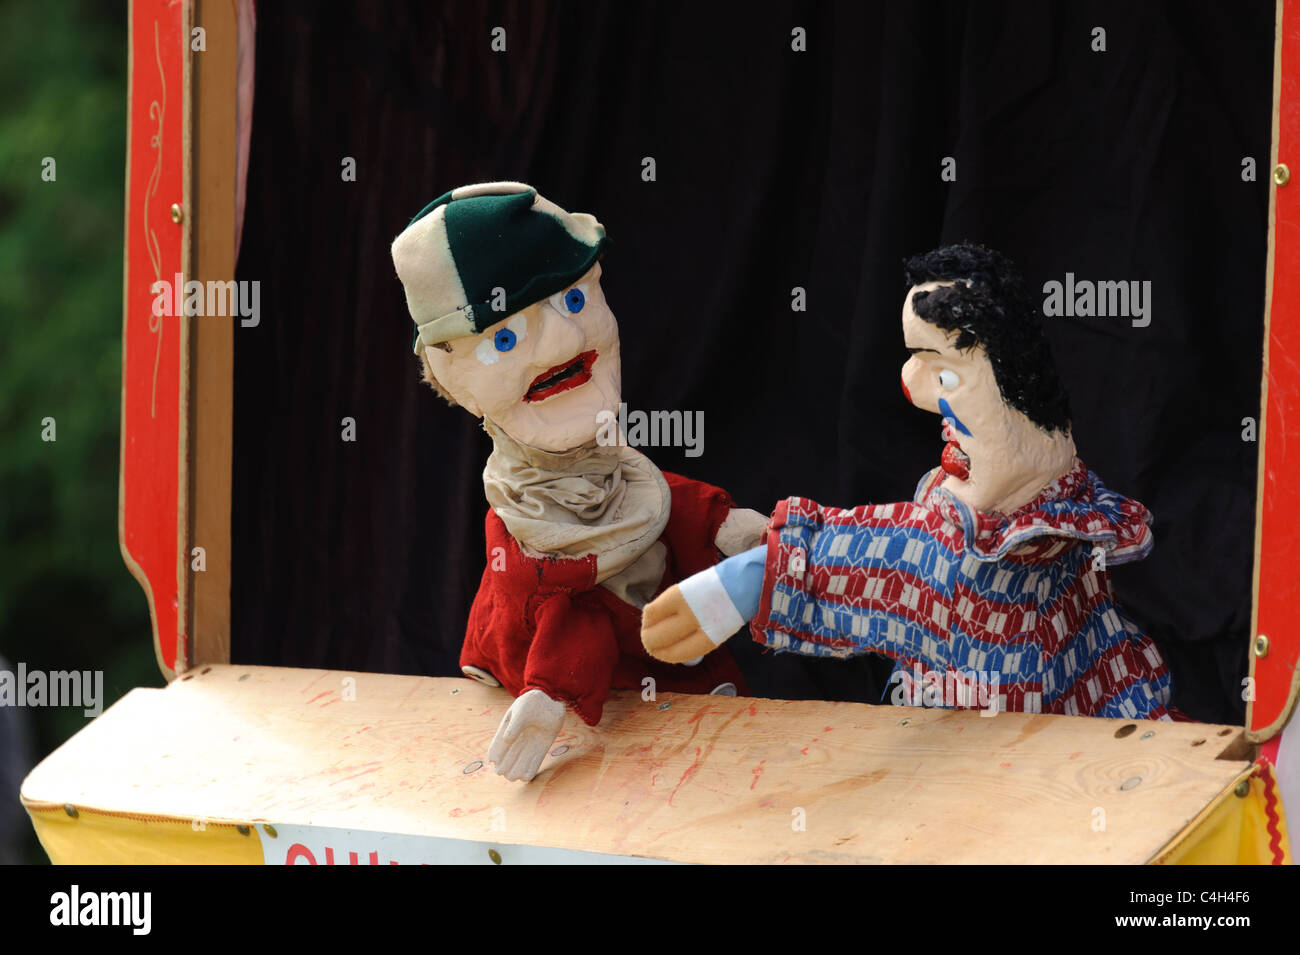 Punch and Judy show, Uk Stock Photo